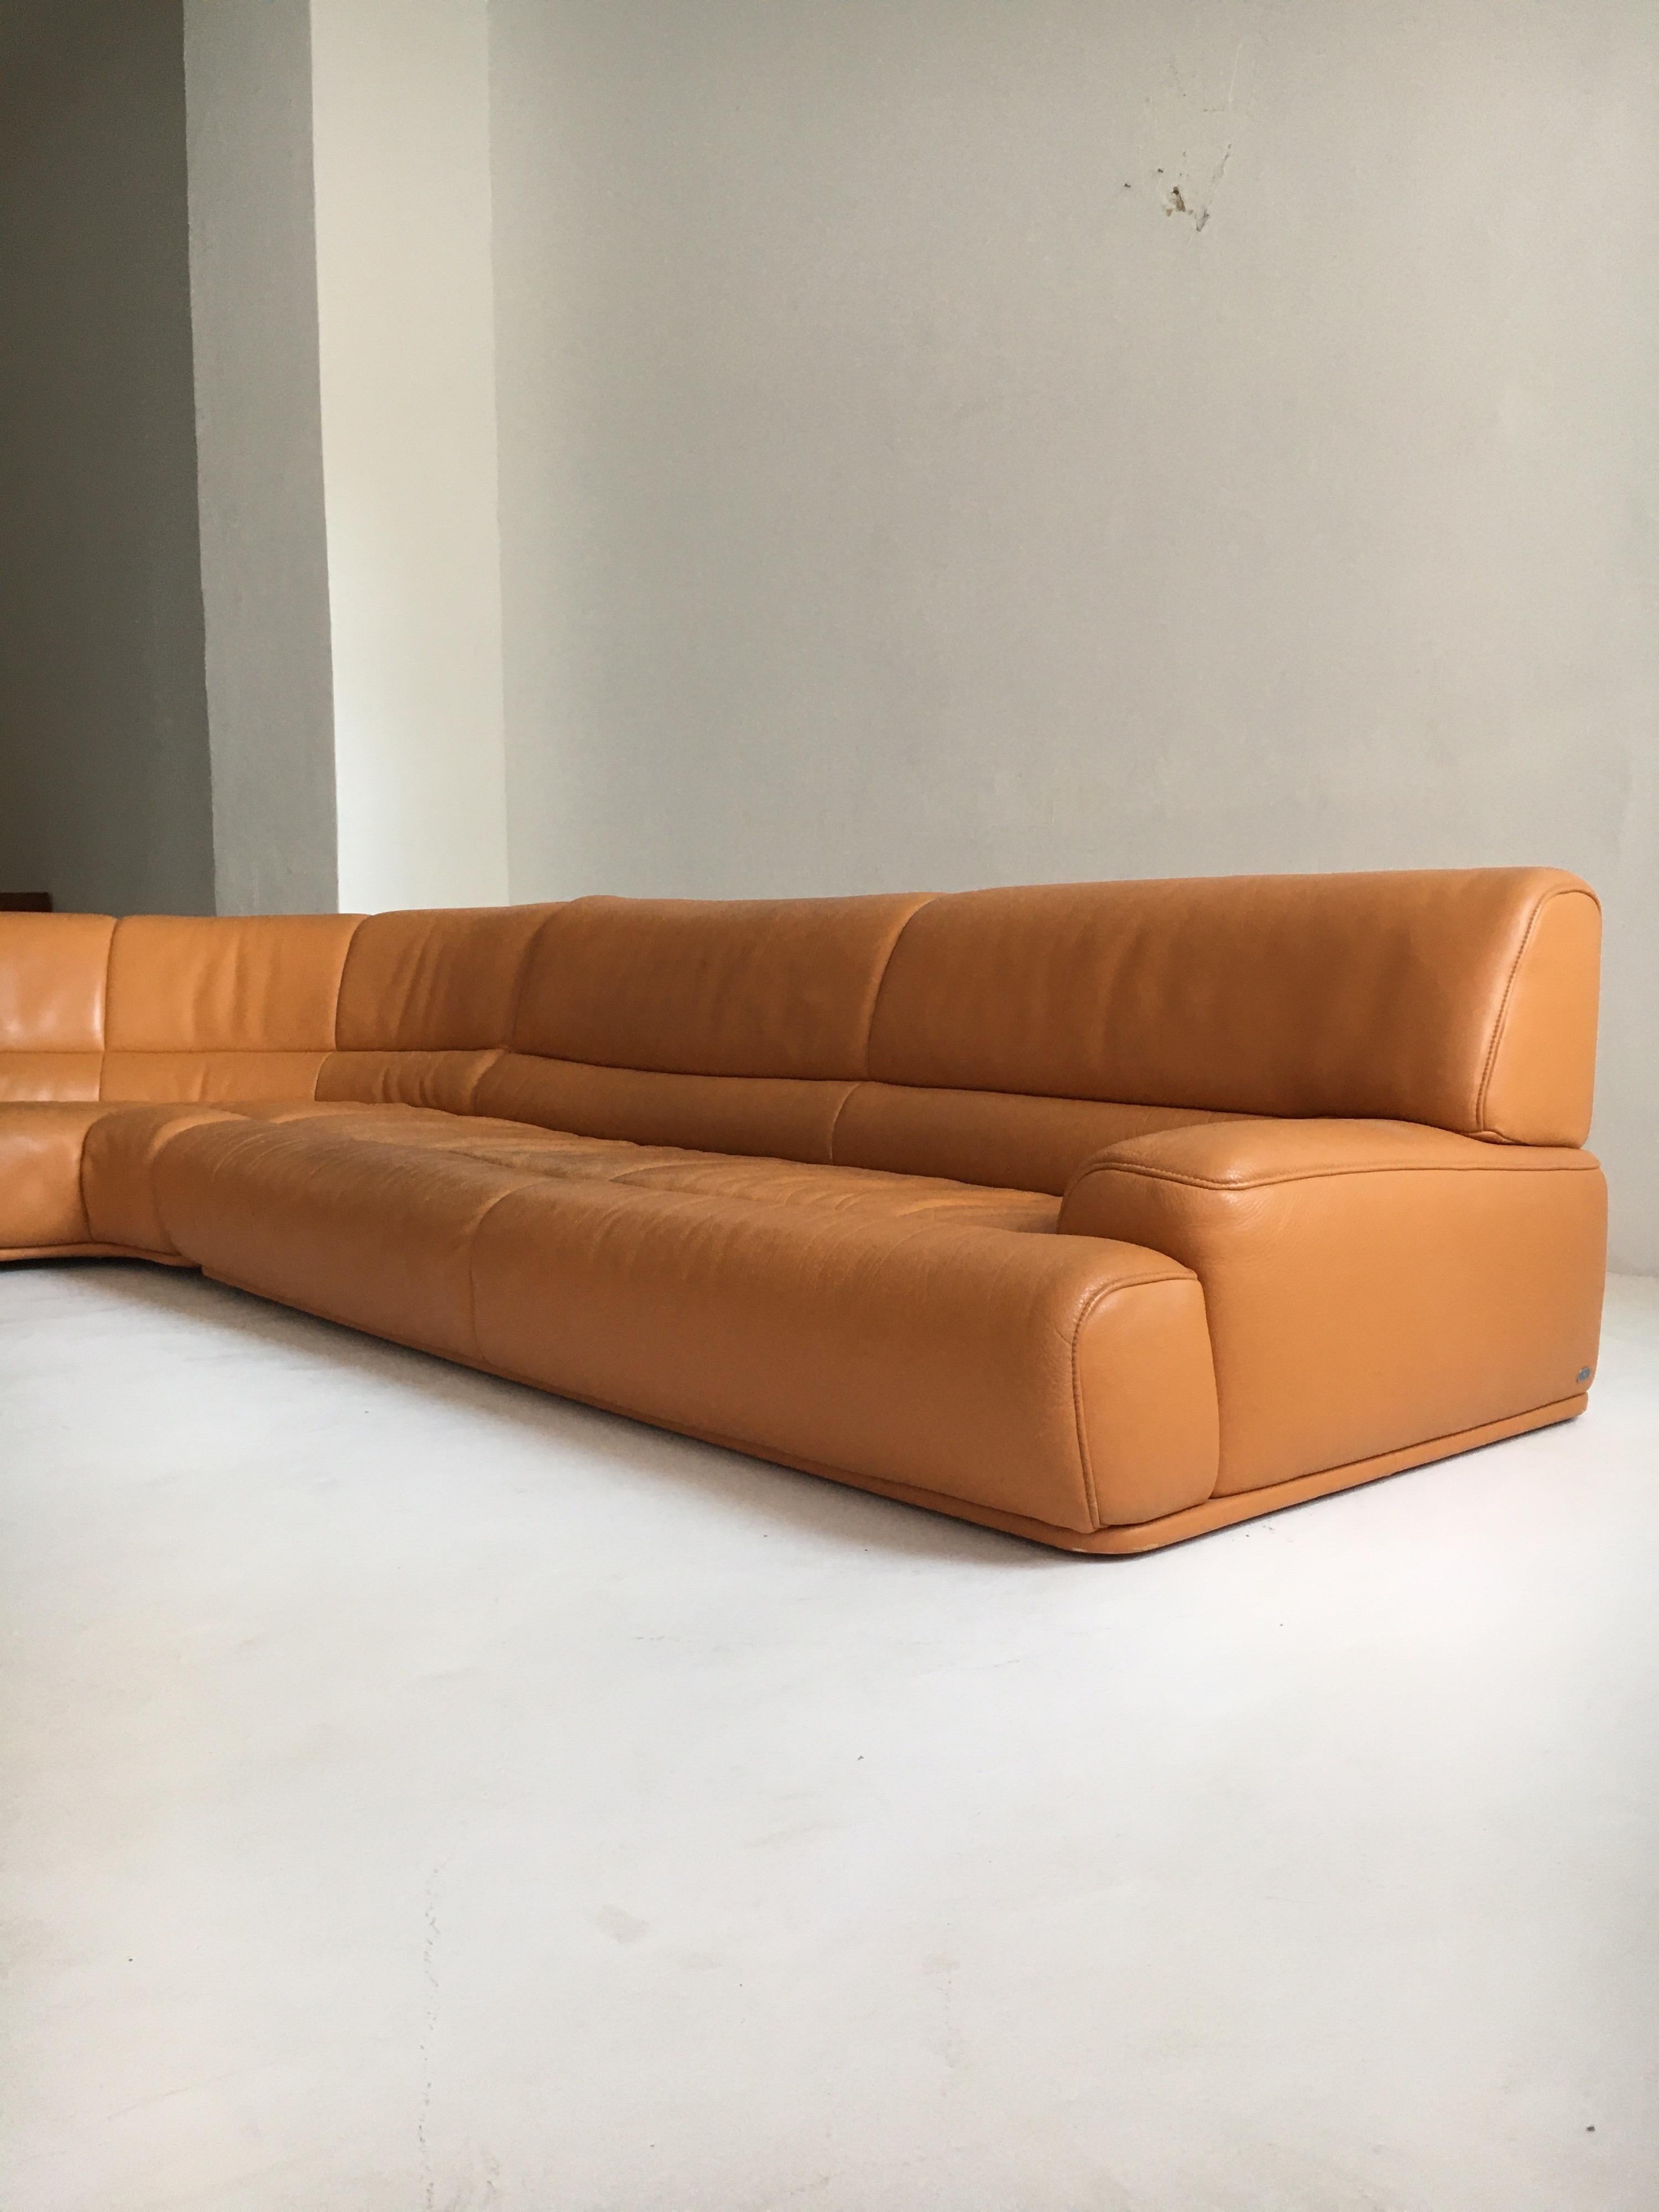 vintage sectional couch